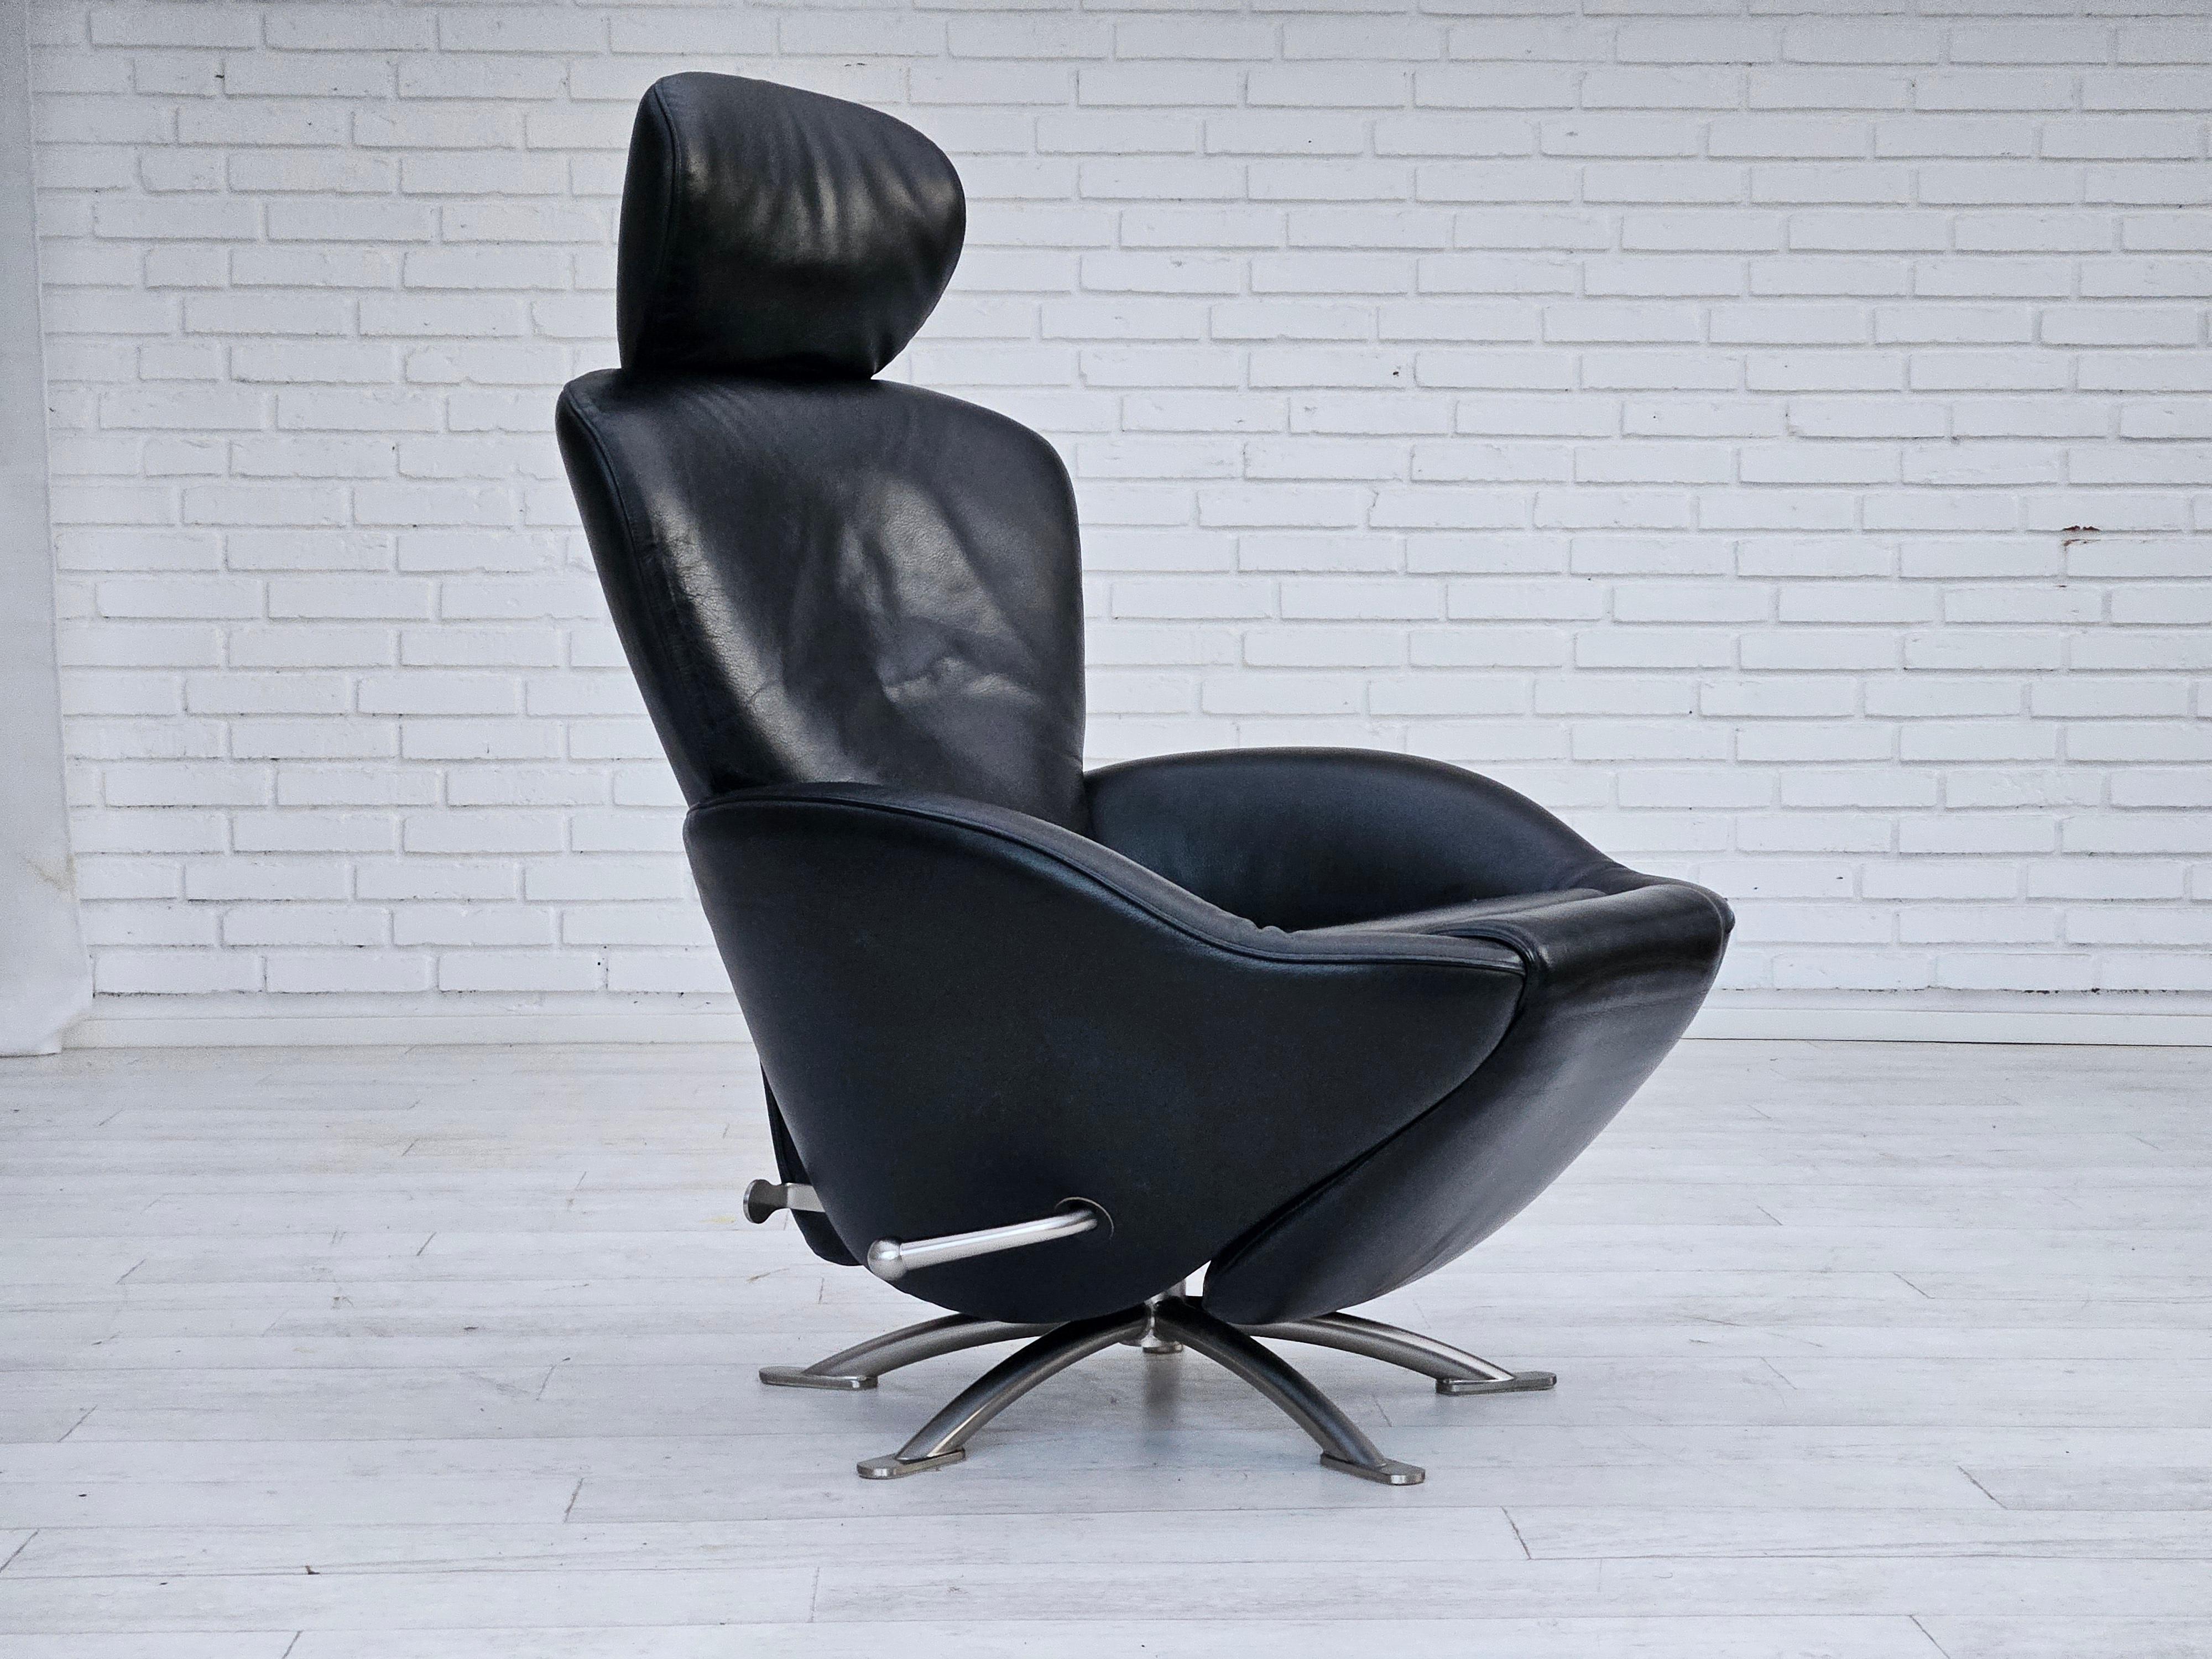 1990s, Japanese design by Toshiyuki Kita for Cassina. Swivel recliner model K10 Dodo in original very good condition. Black leather, stainless steel. Backrest with adjustable tilt and extendable leg support. Manufactured by Italian furniture